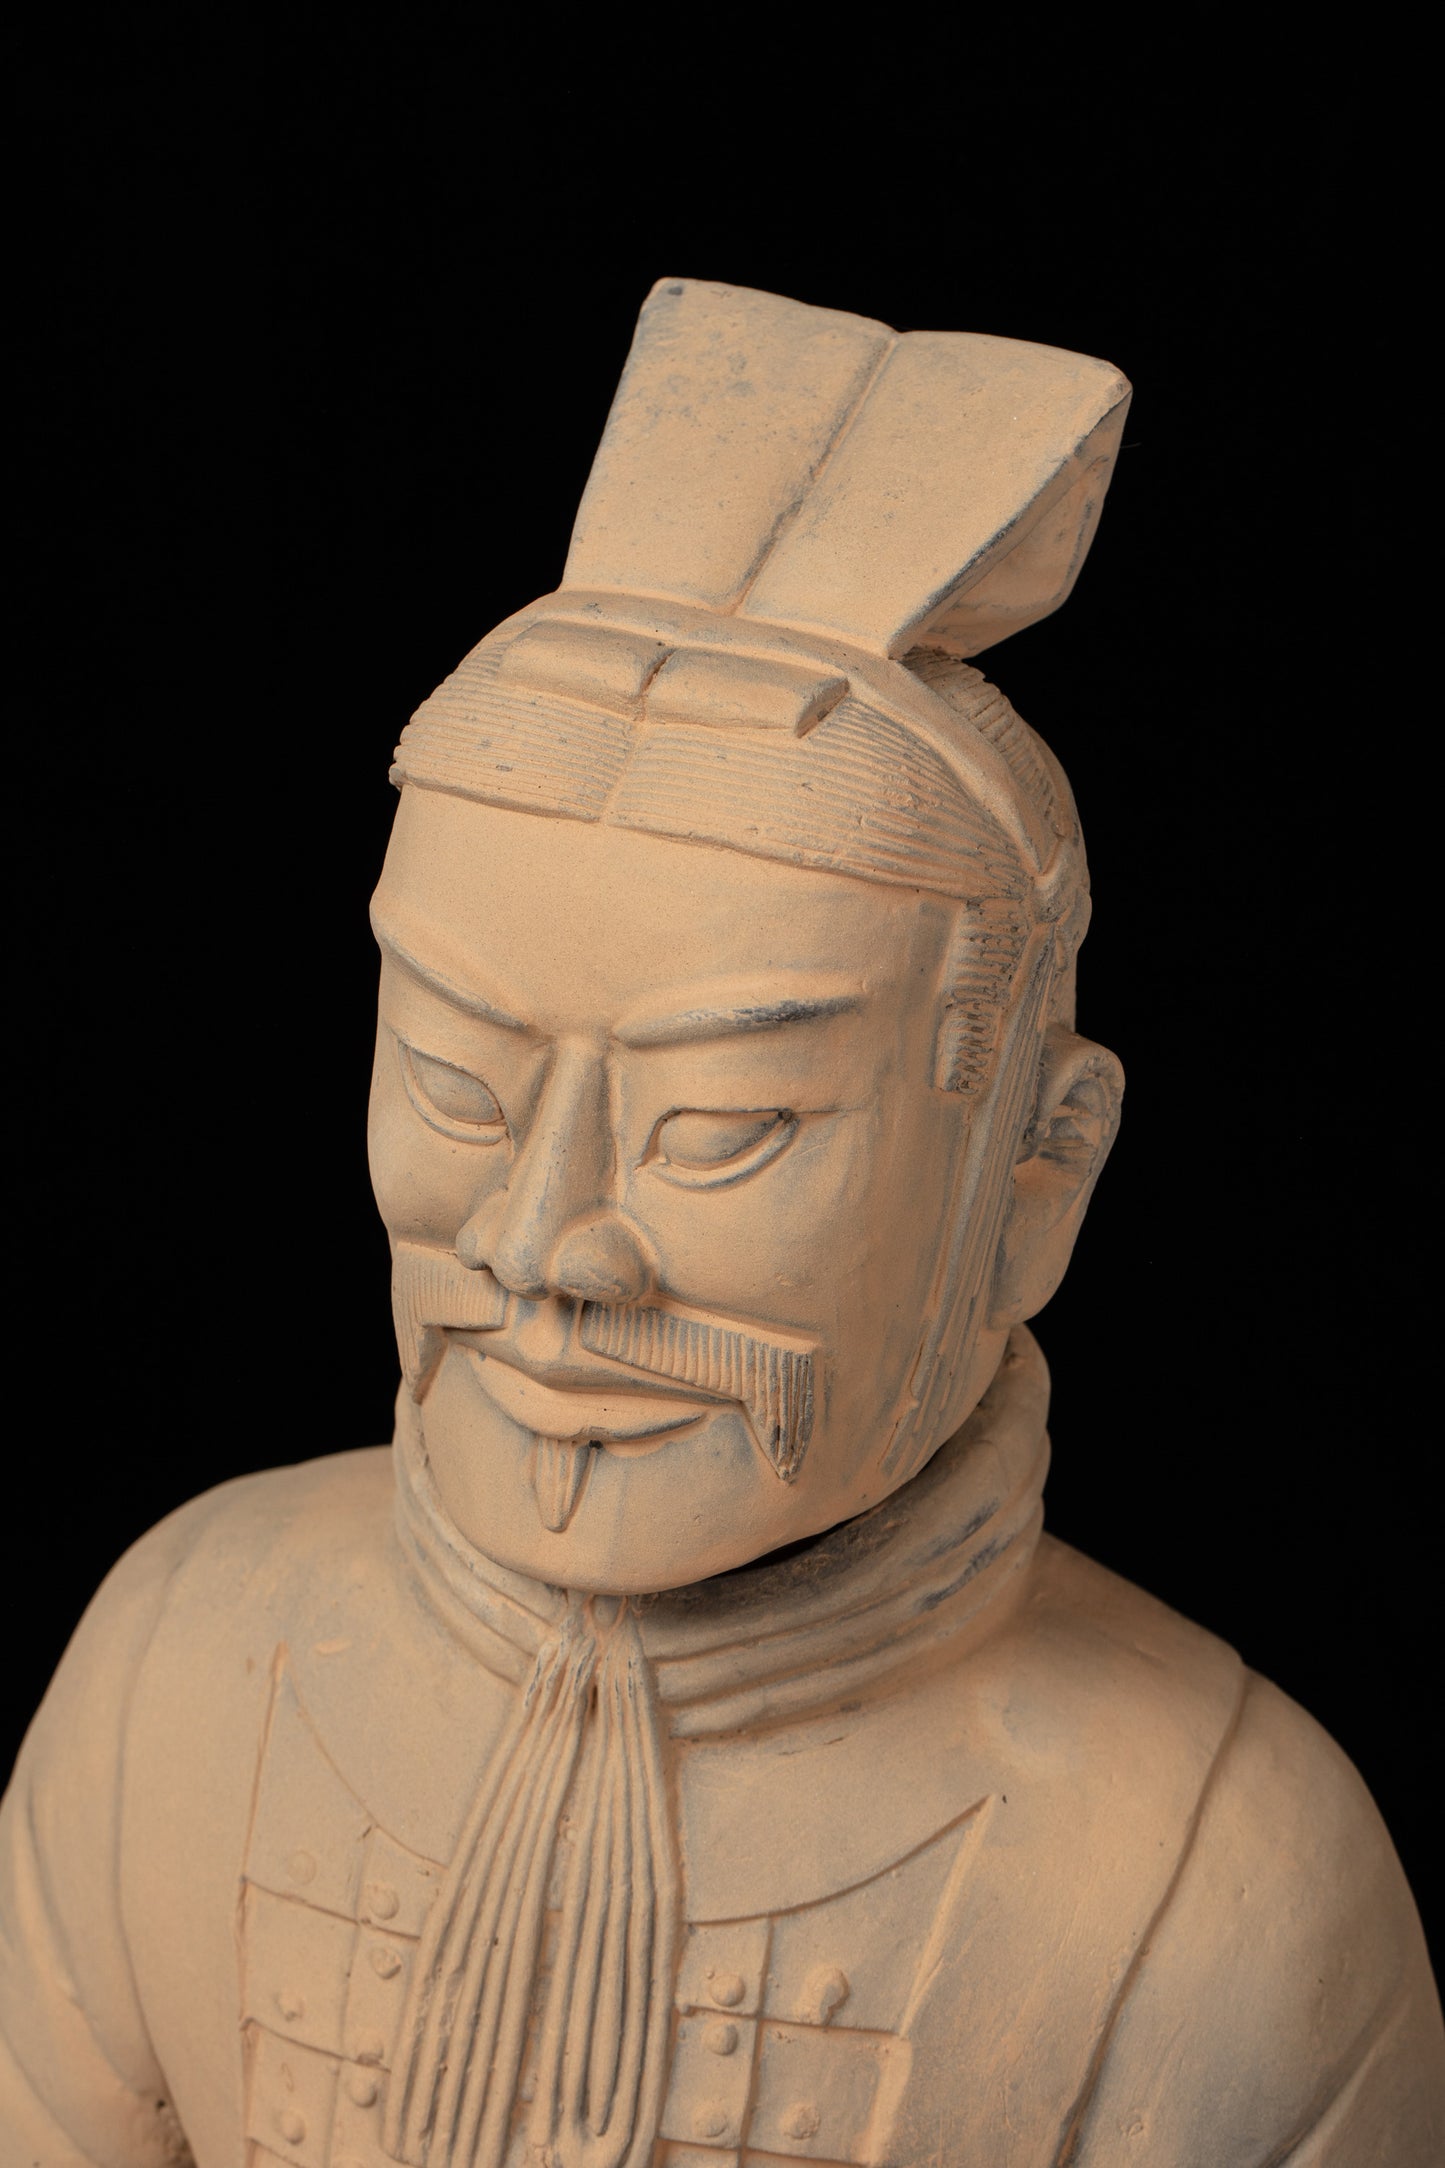 70CM Officier - CLAYARMY-Close-up shot capturing the facial expression and meticulous craftsmanship of the 70CM Officer.